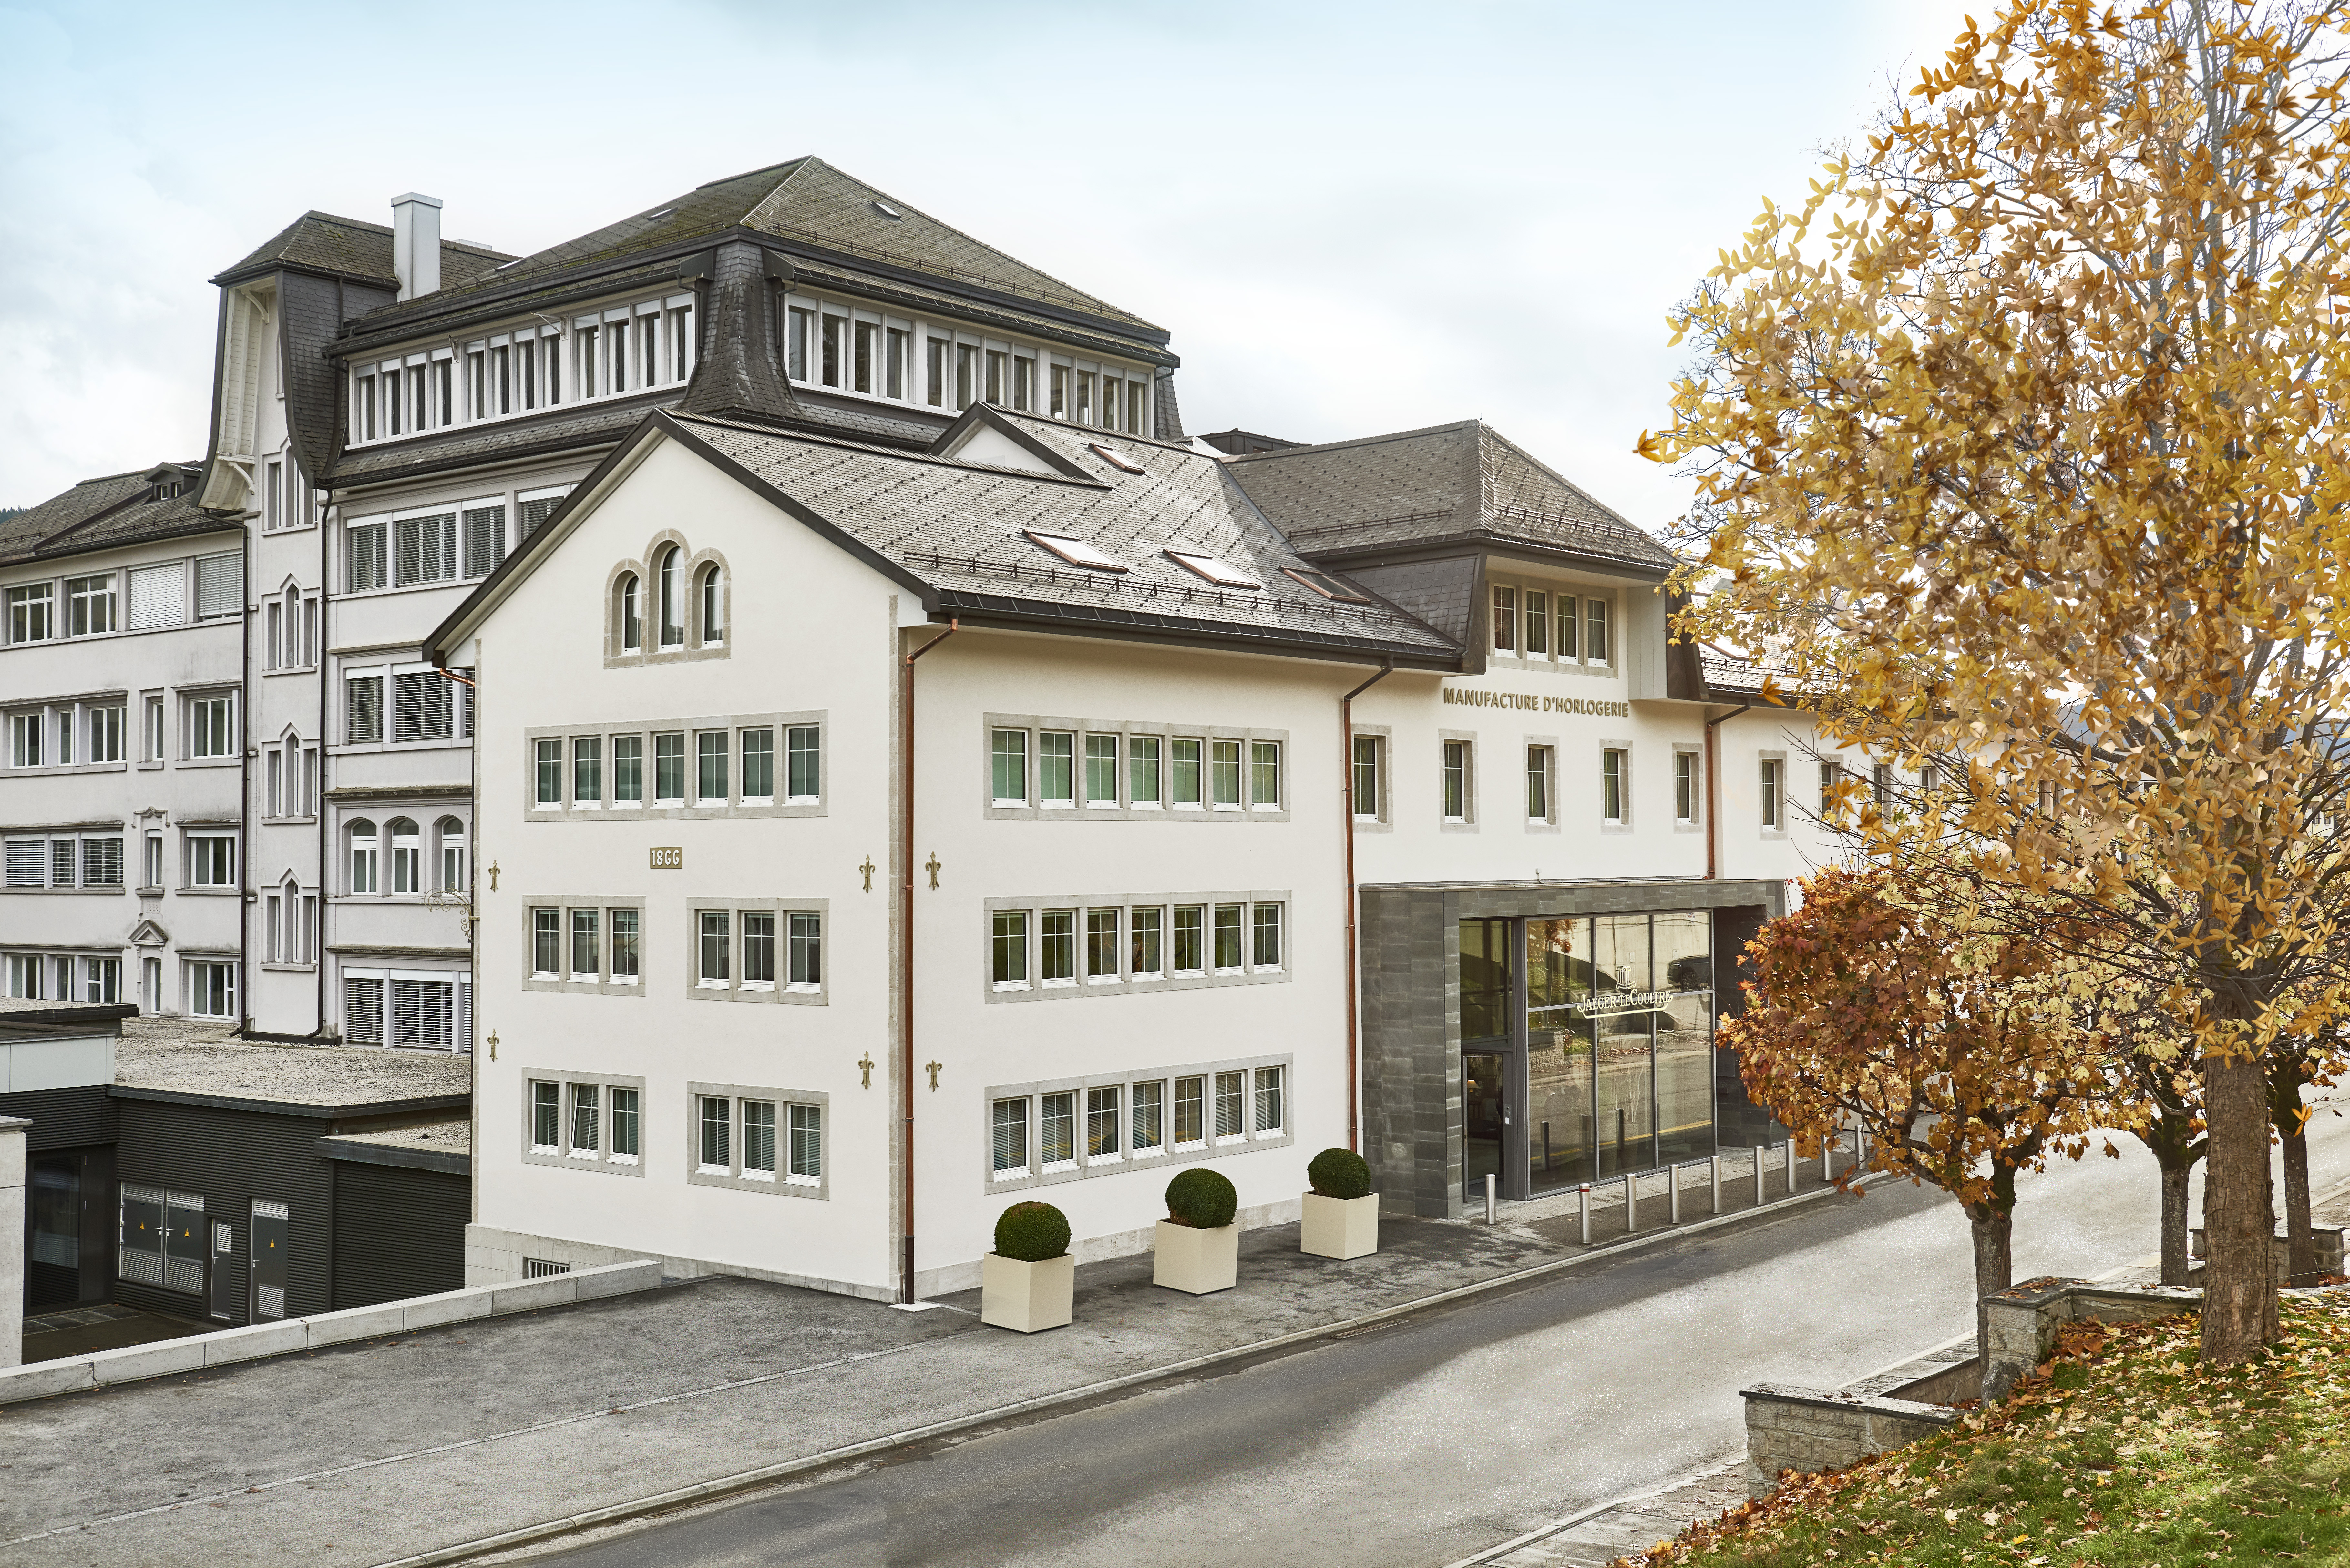 Home of Fine Watchmaking: Legacy of Tradition and Innovation